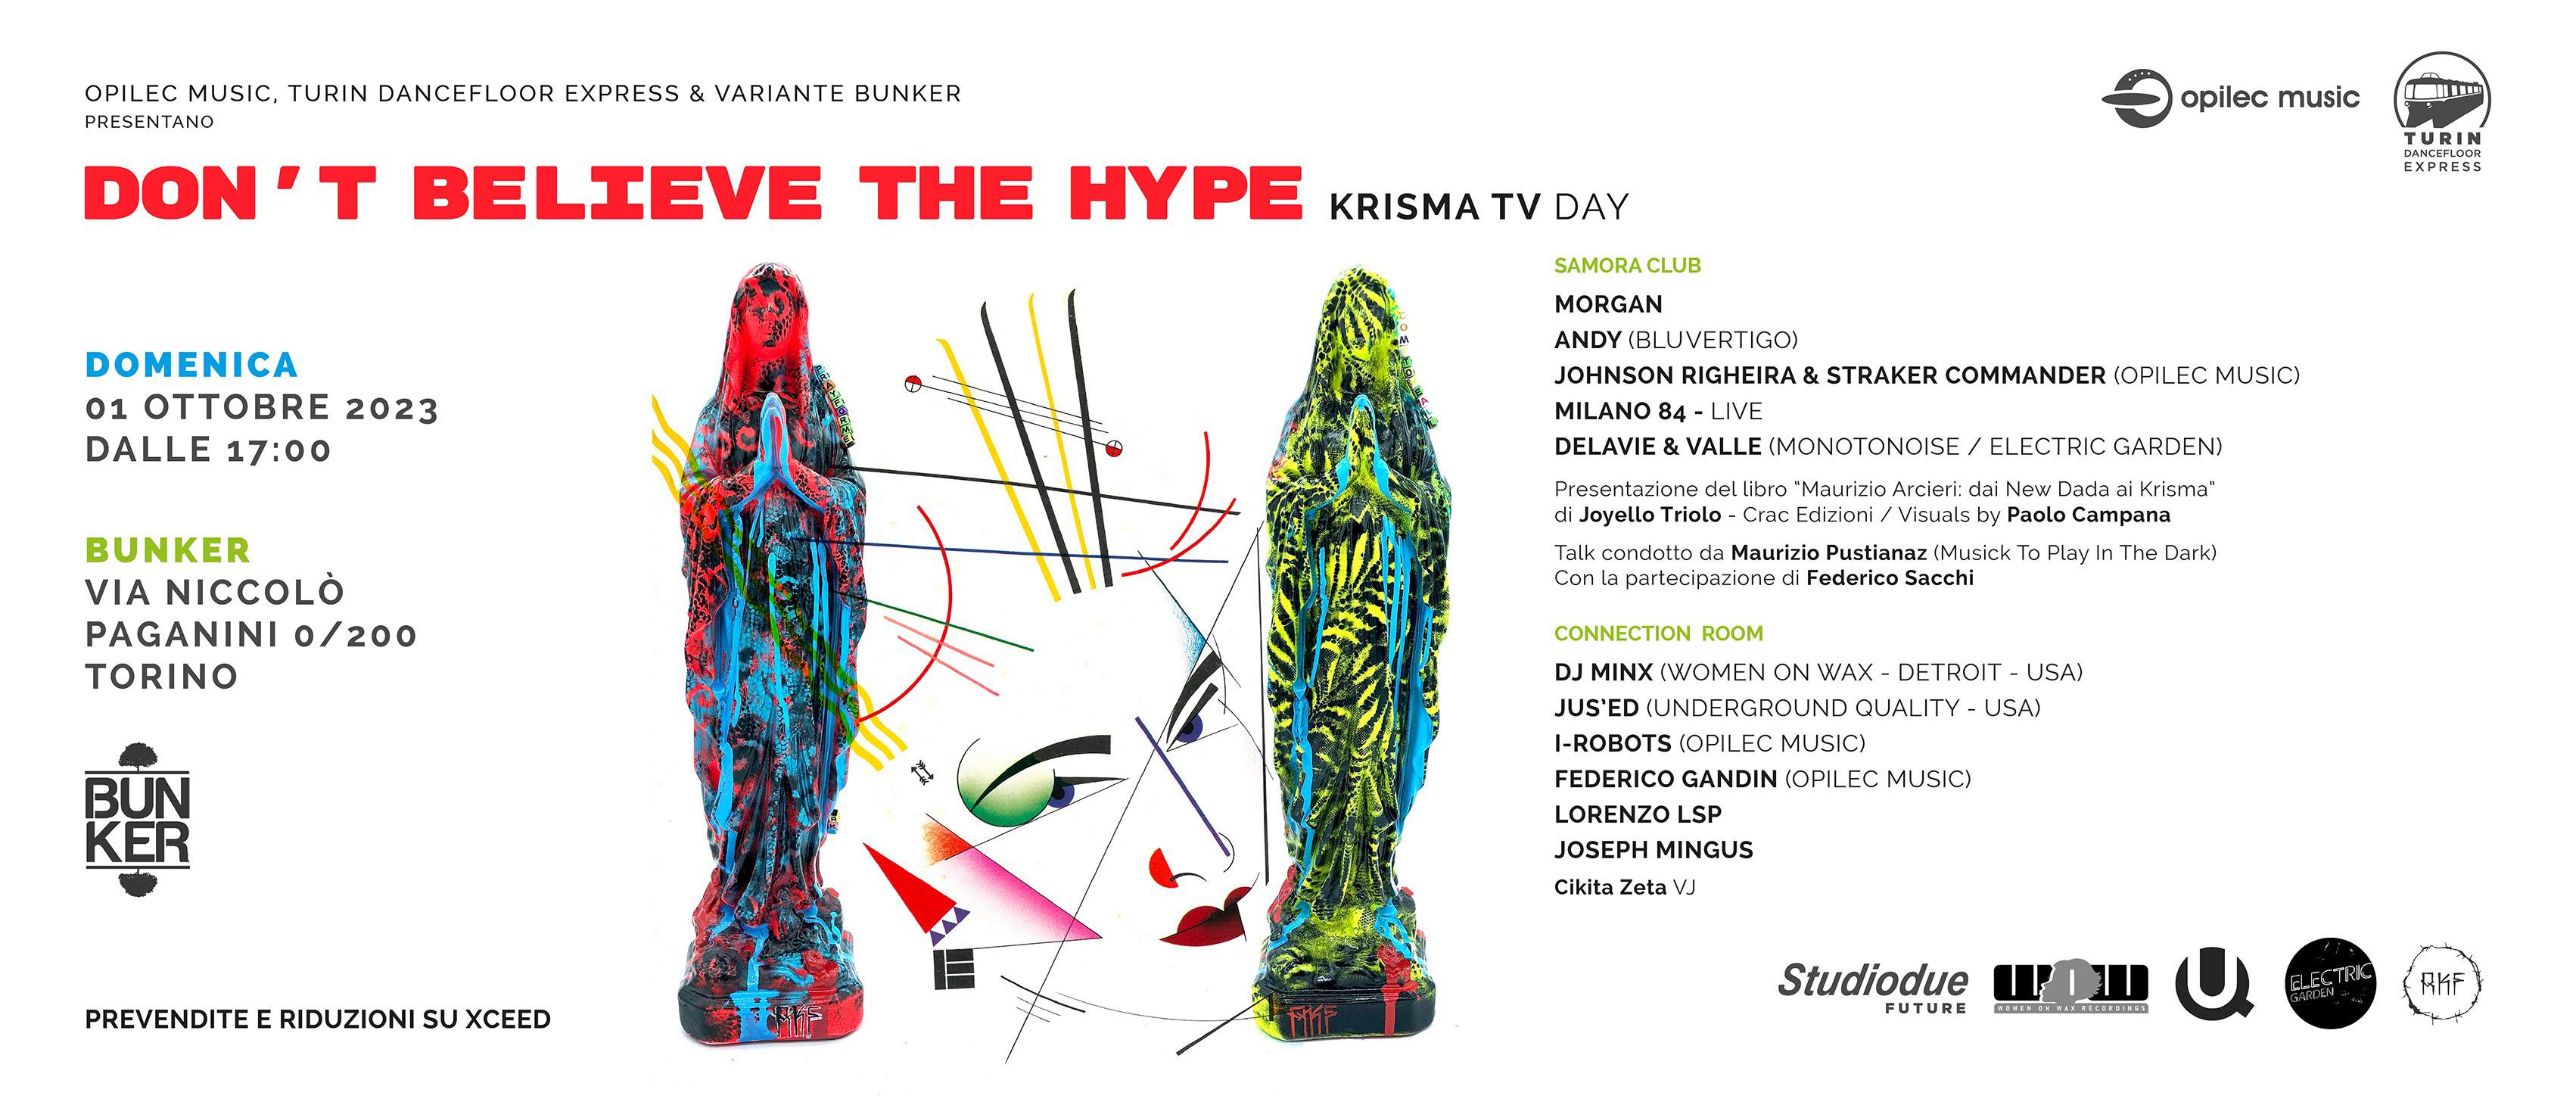 DON'T BELIEVE THE HYPE - KRISMA TV DAY - フライヤー表